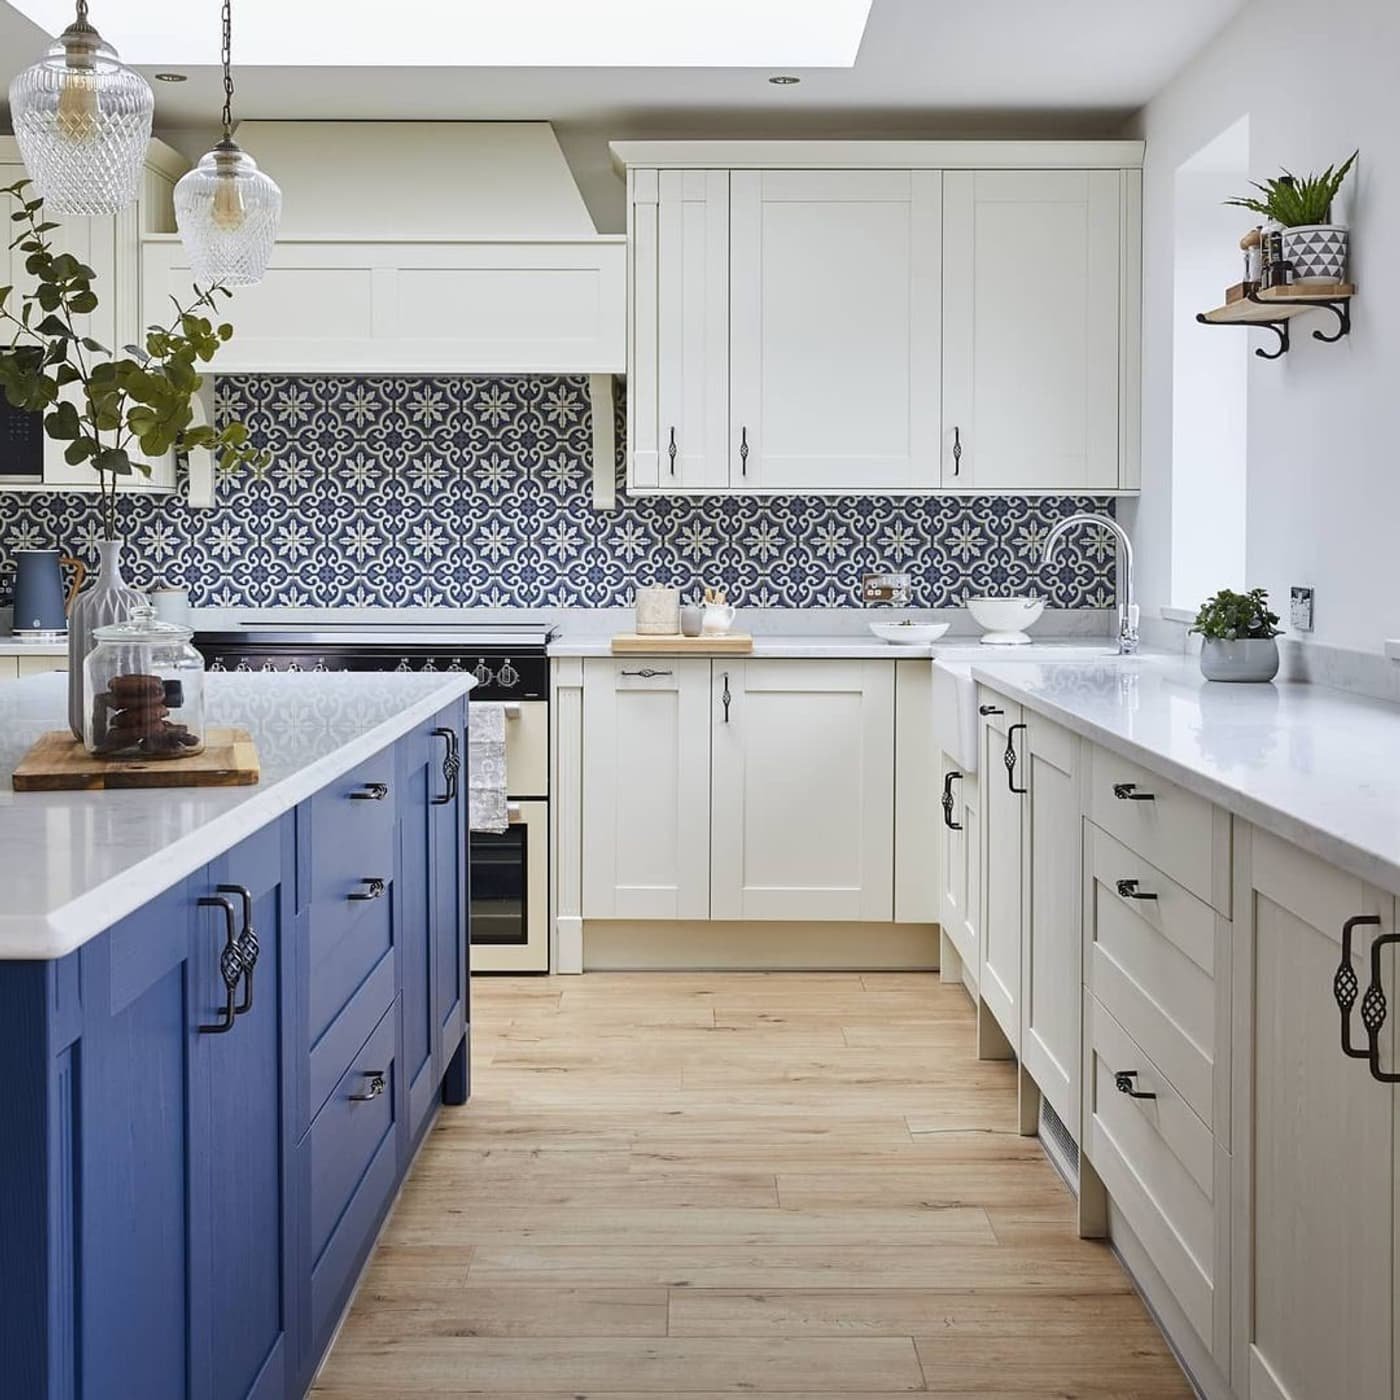 The Top Uk Kitchen Companies Please